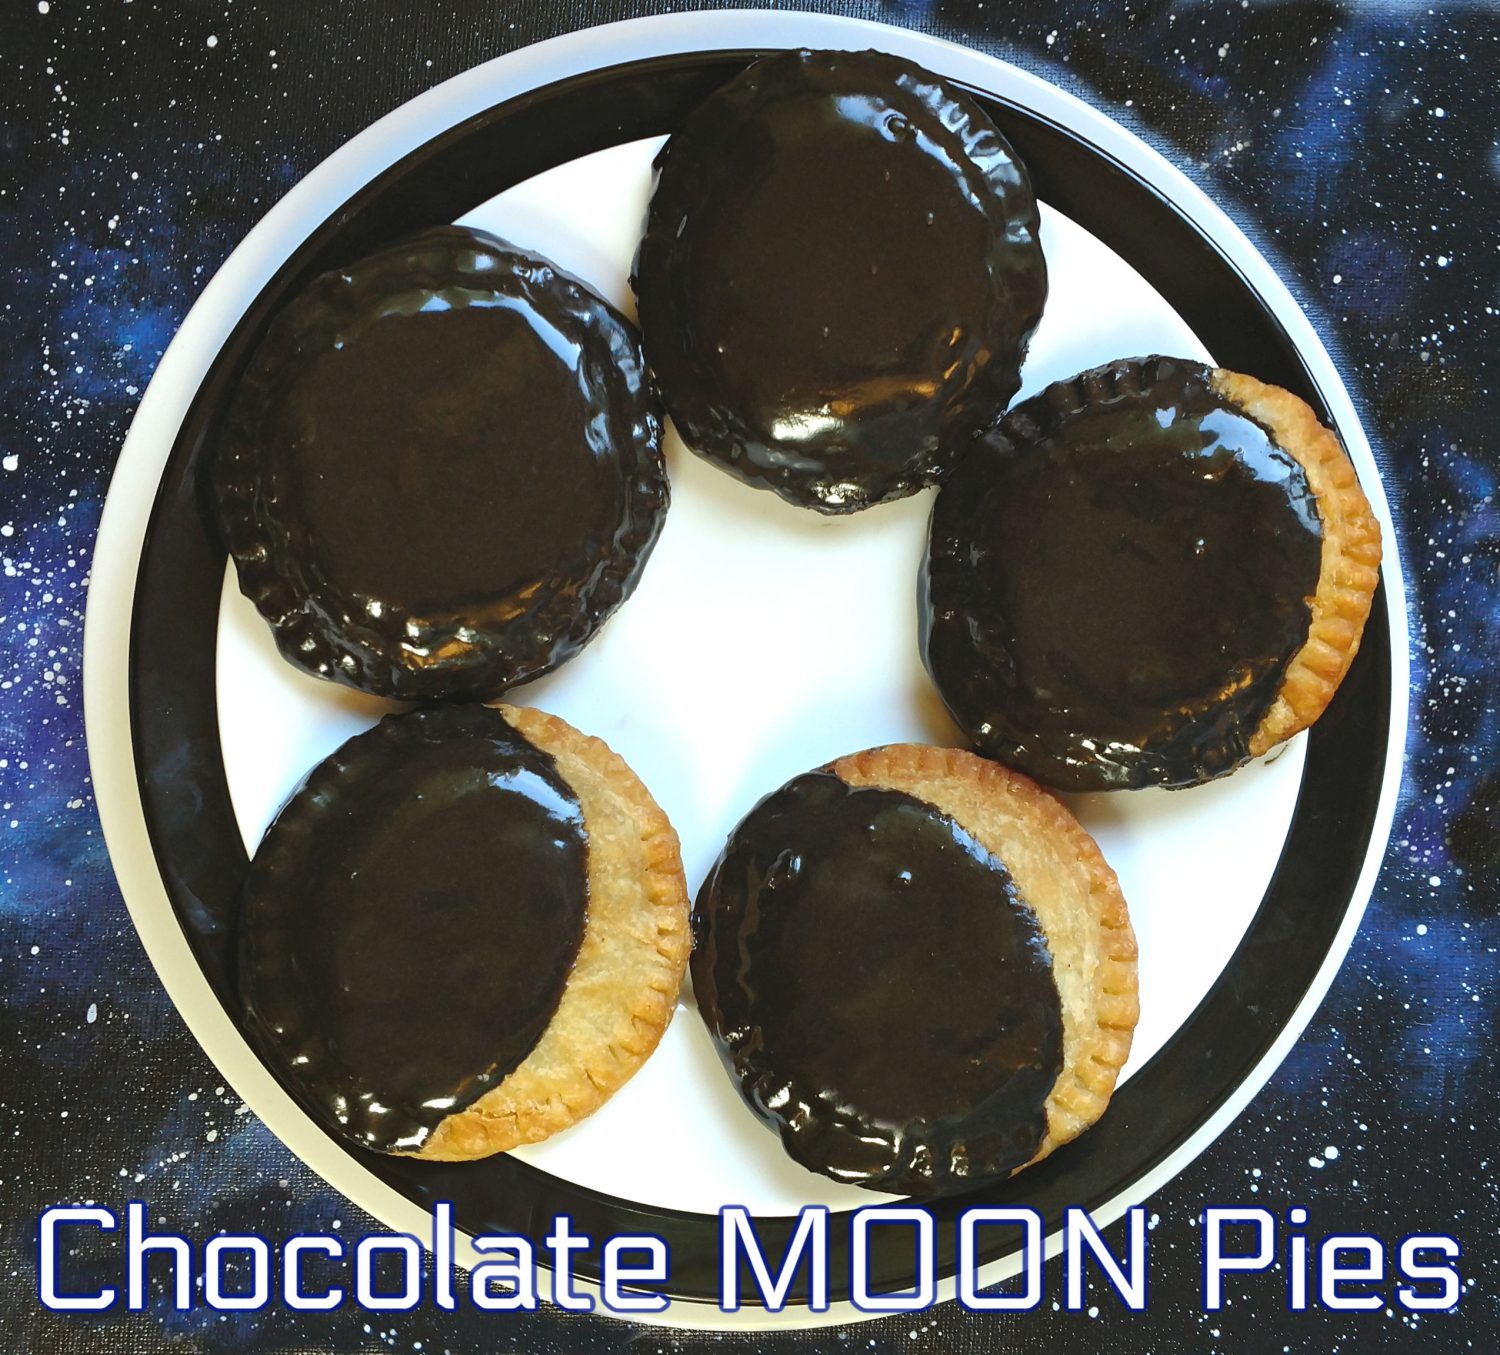 Chocolate Hand Pies! Creamy smooth chocolate filling, crispy buttermilk crust with just the right amount of glaze, no need to wait for a solar eclipse!